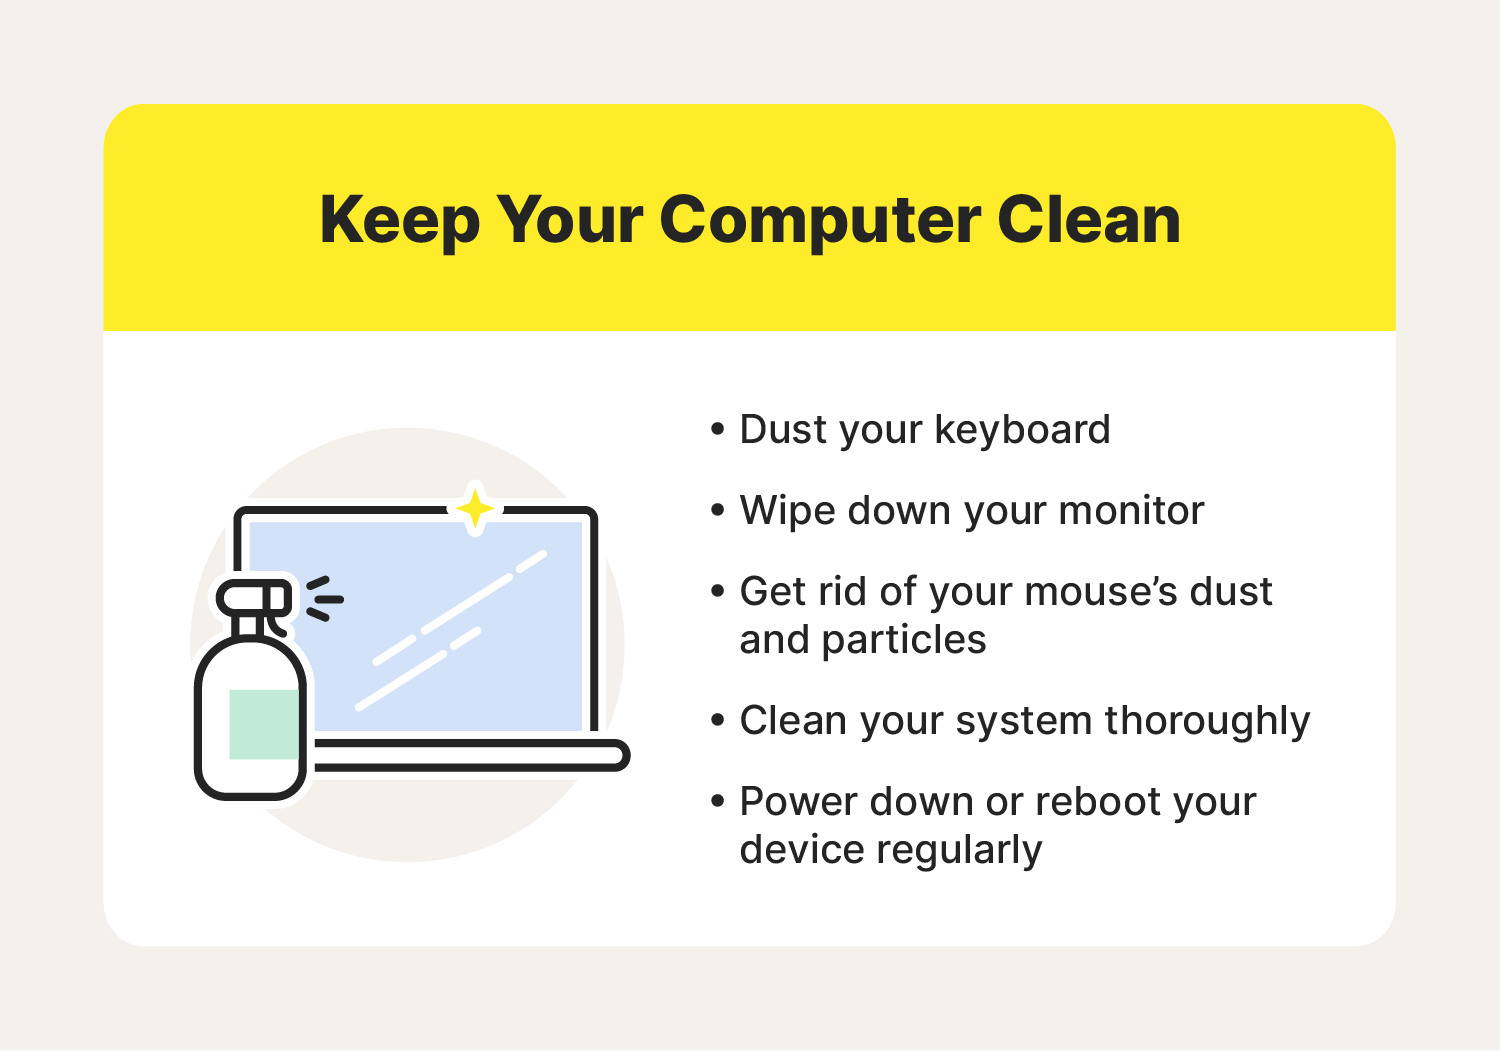 How to Keep Your Laptop or Desktop Well Maintained